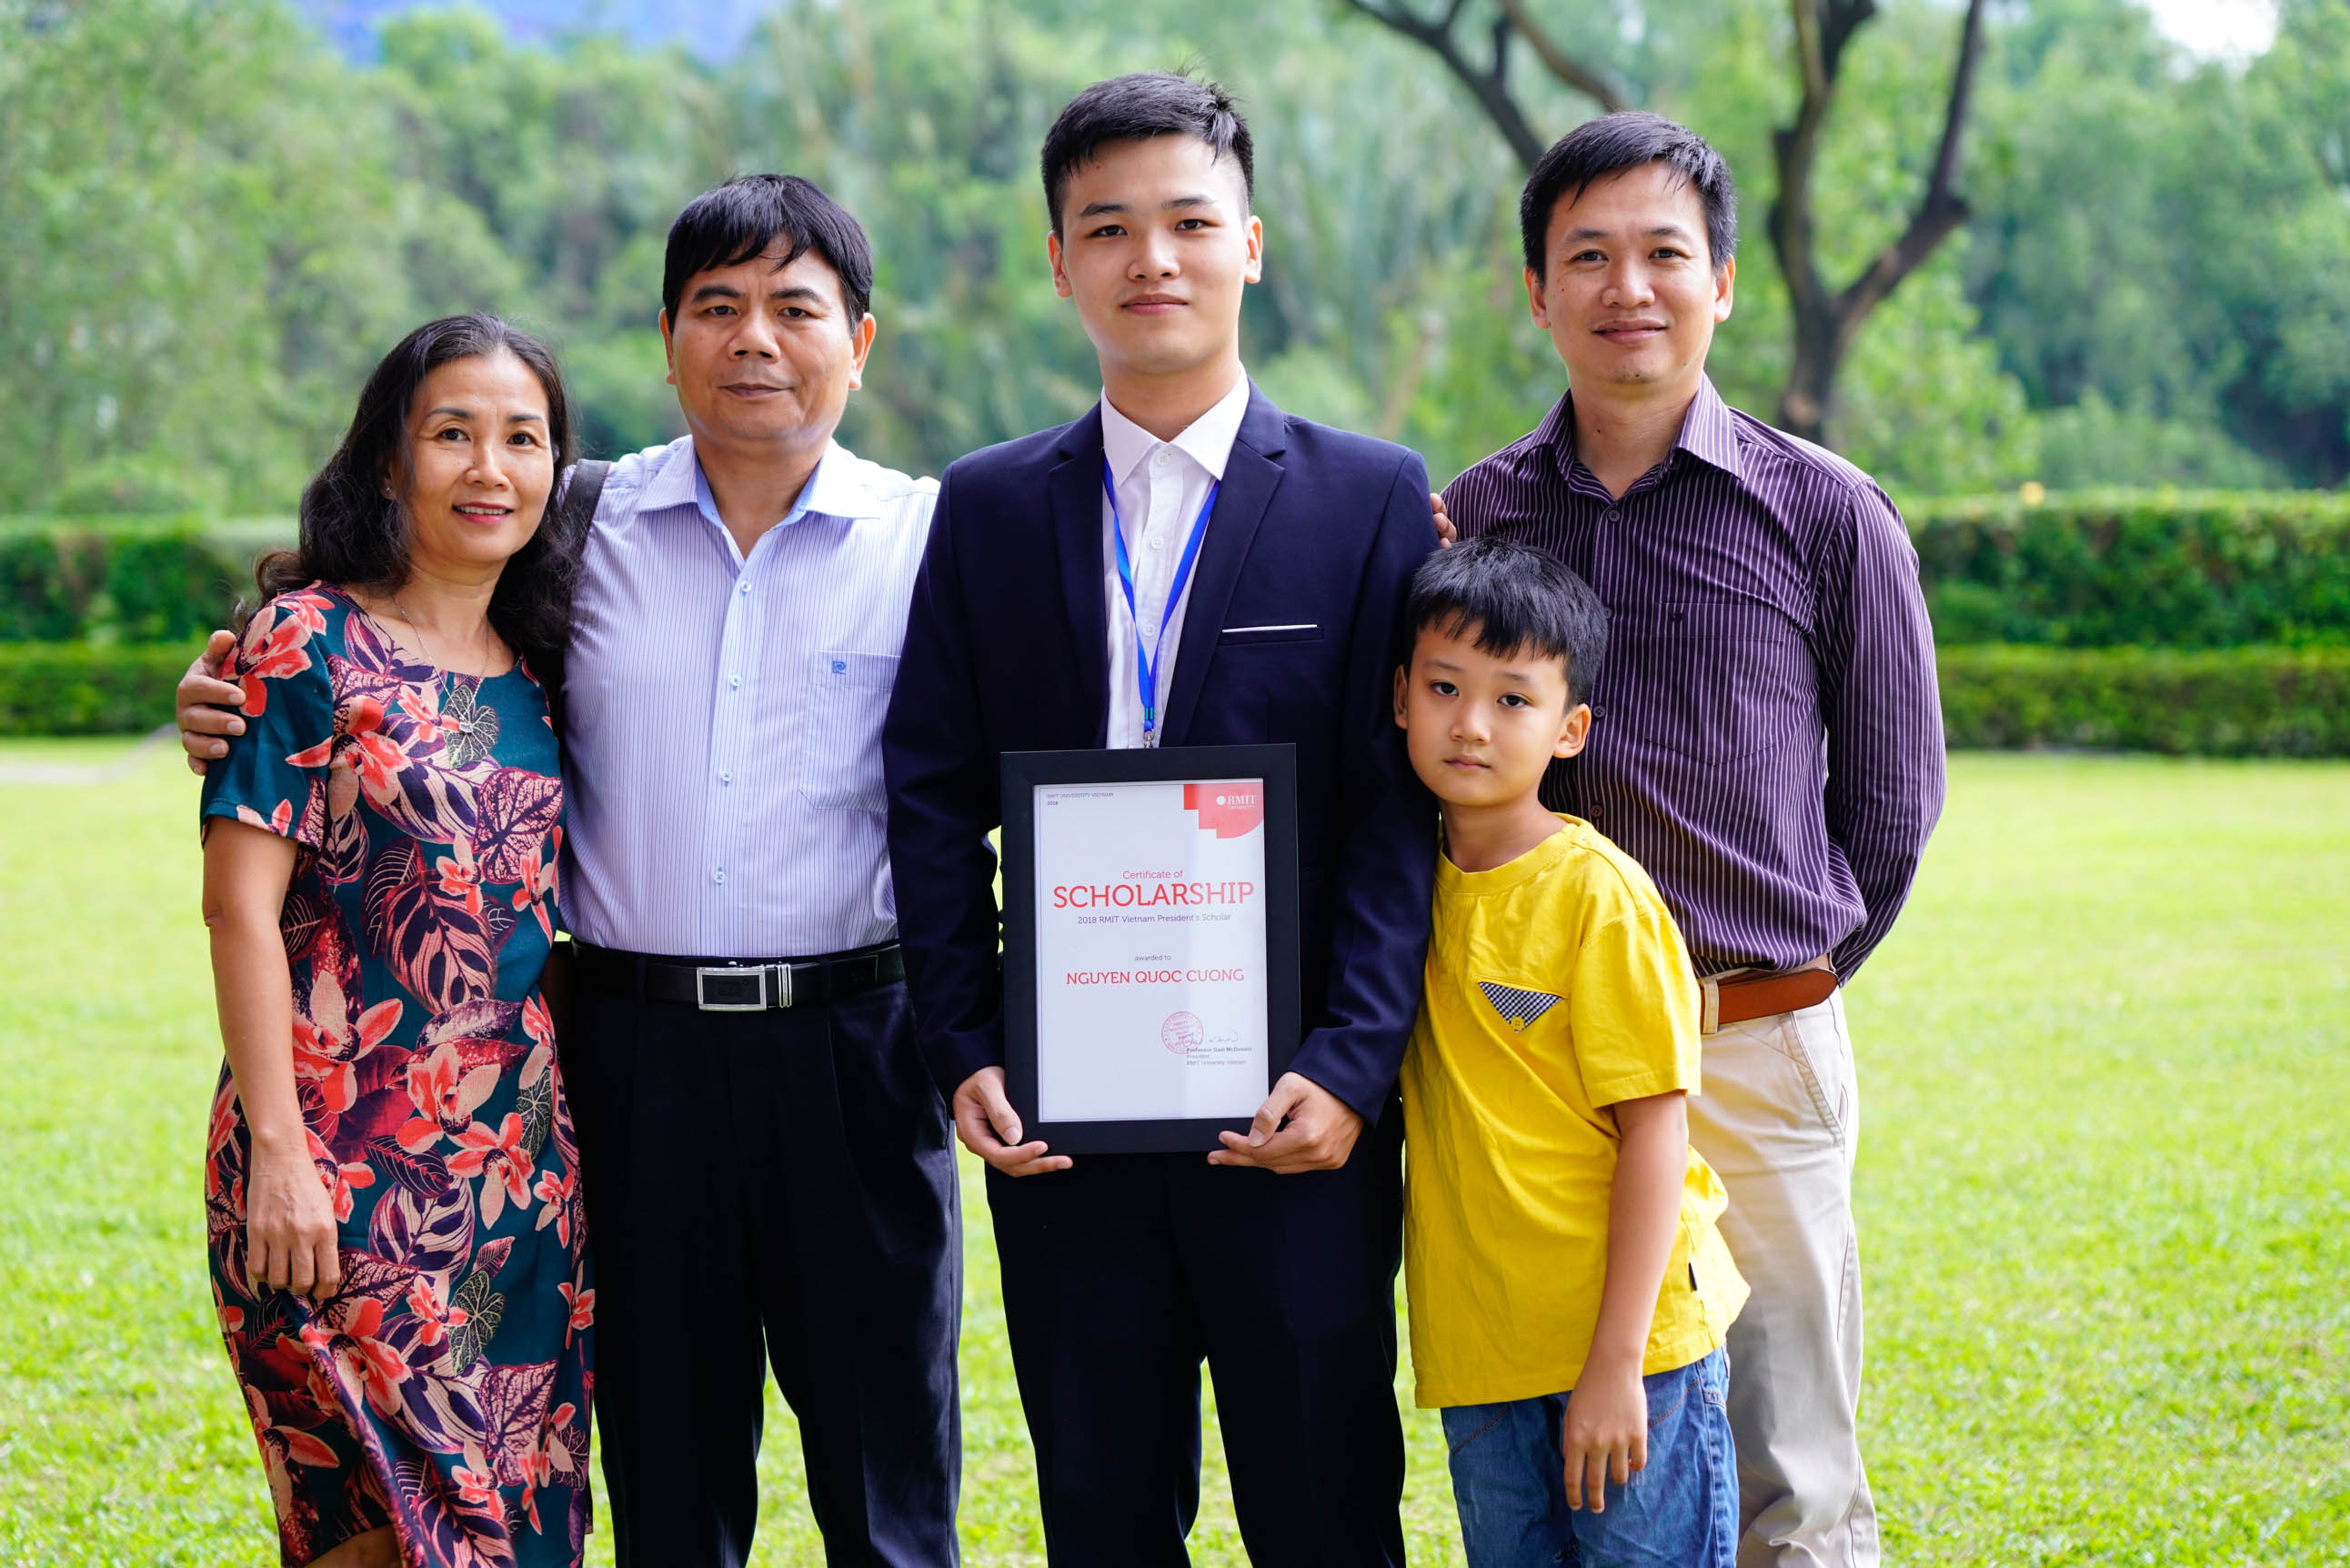 Quoc Cuong with his family at the Scholarship Presentation Ceremony